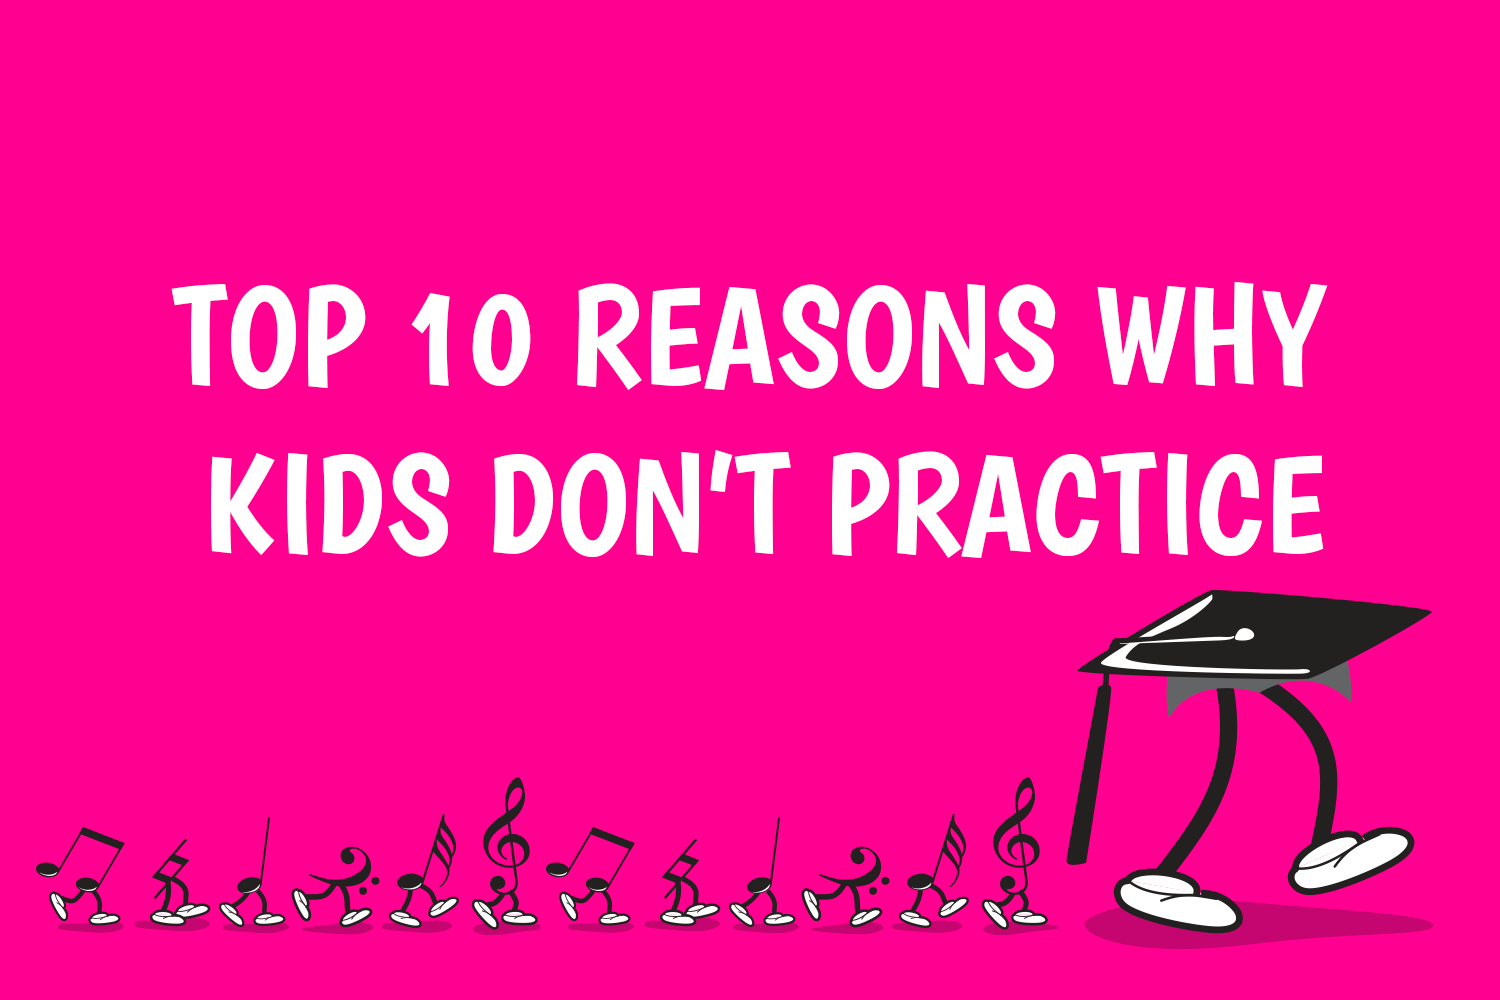 Top 10 Reasons Why Kids Don't Practice